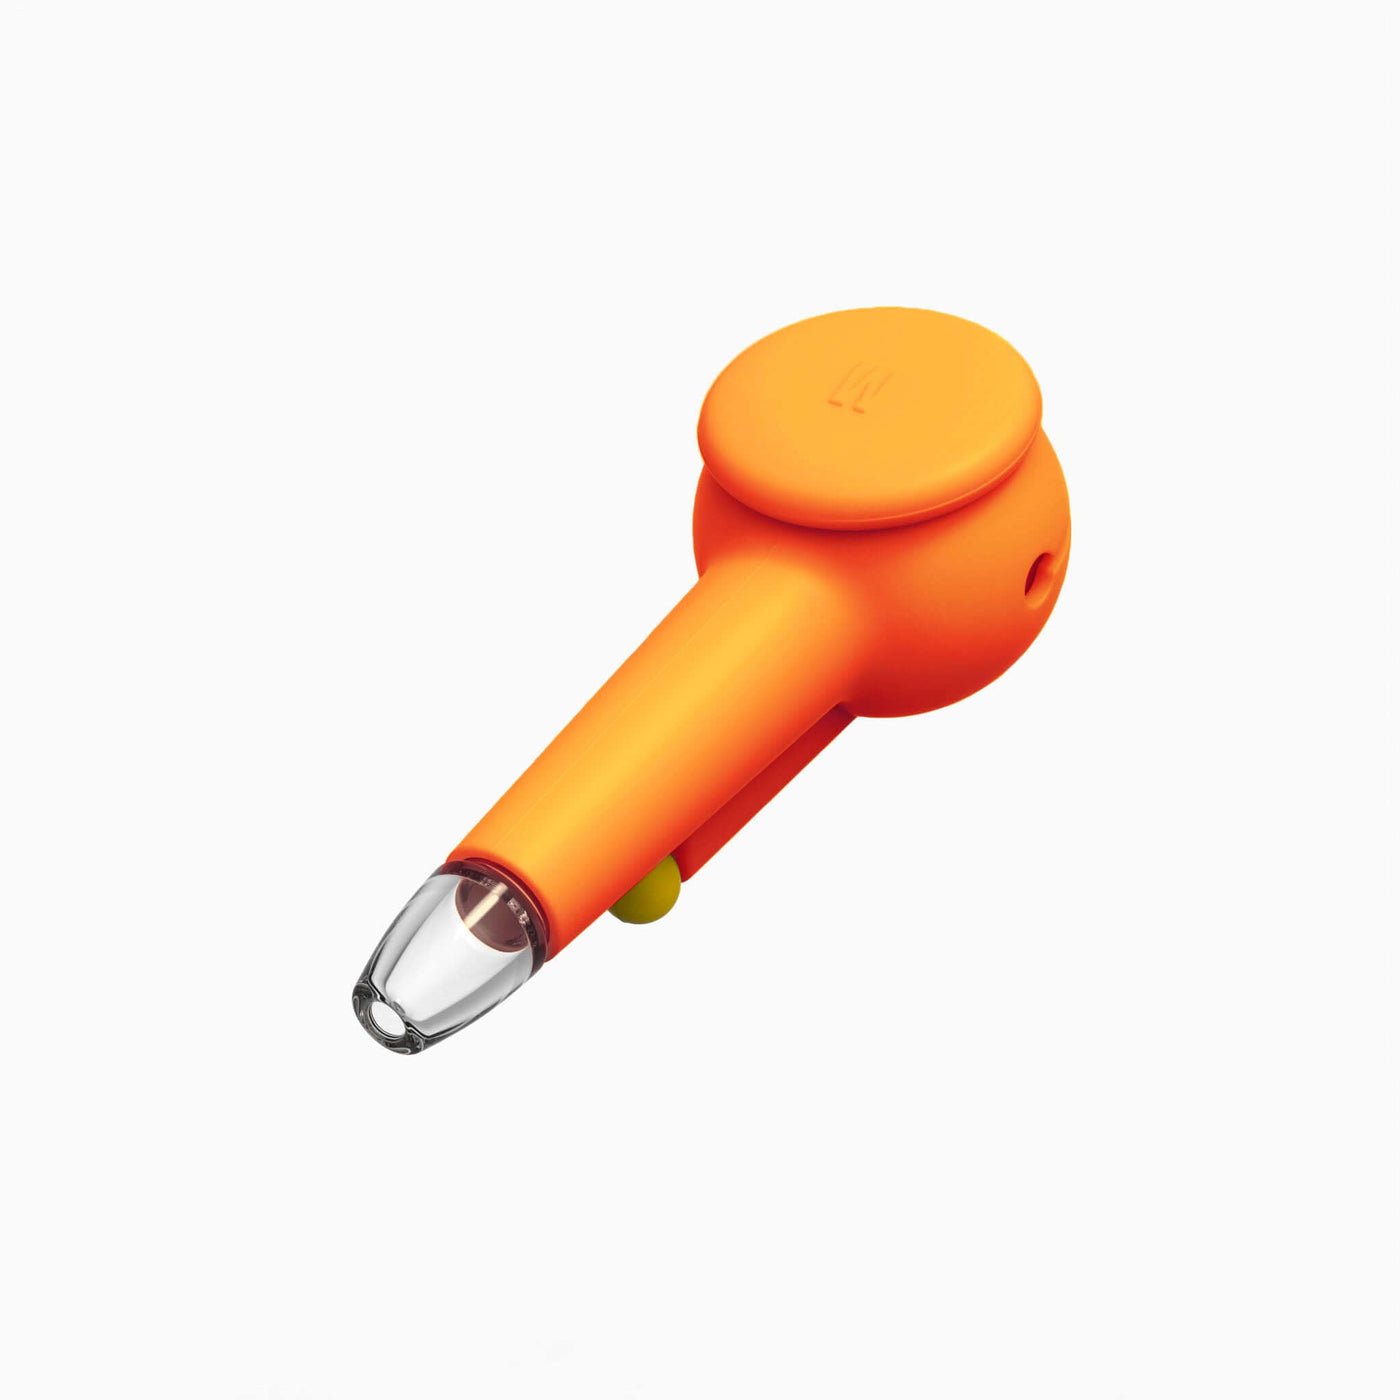 Render of a Weeday glass spoon pipe with pumpkin orange silicone covers, on a white background.